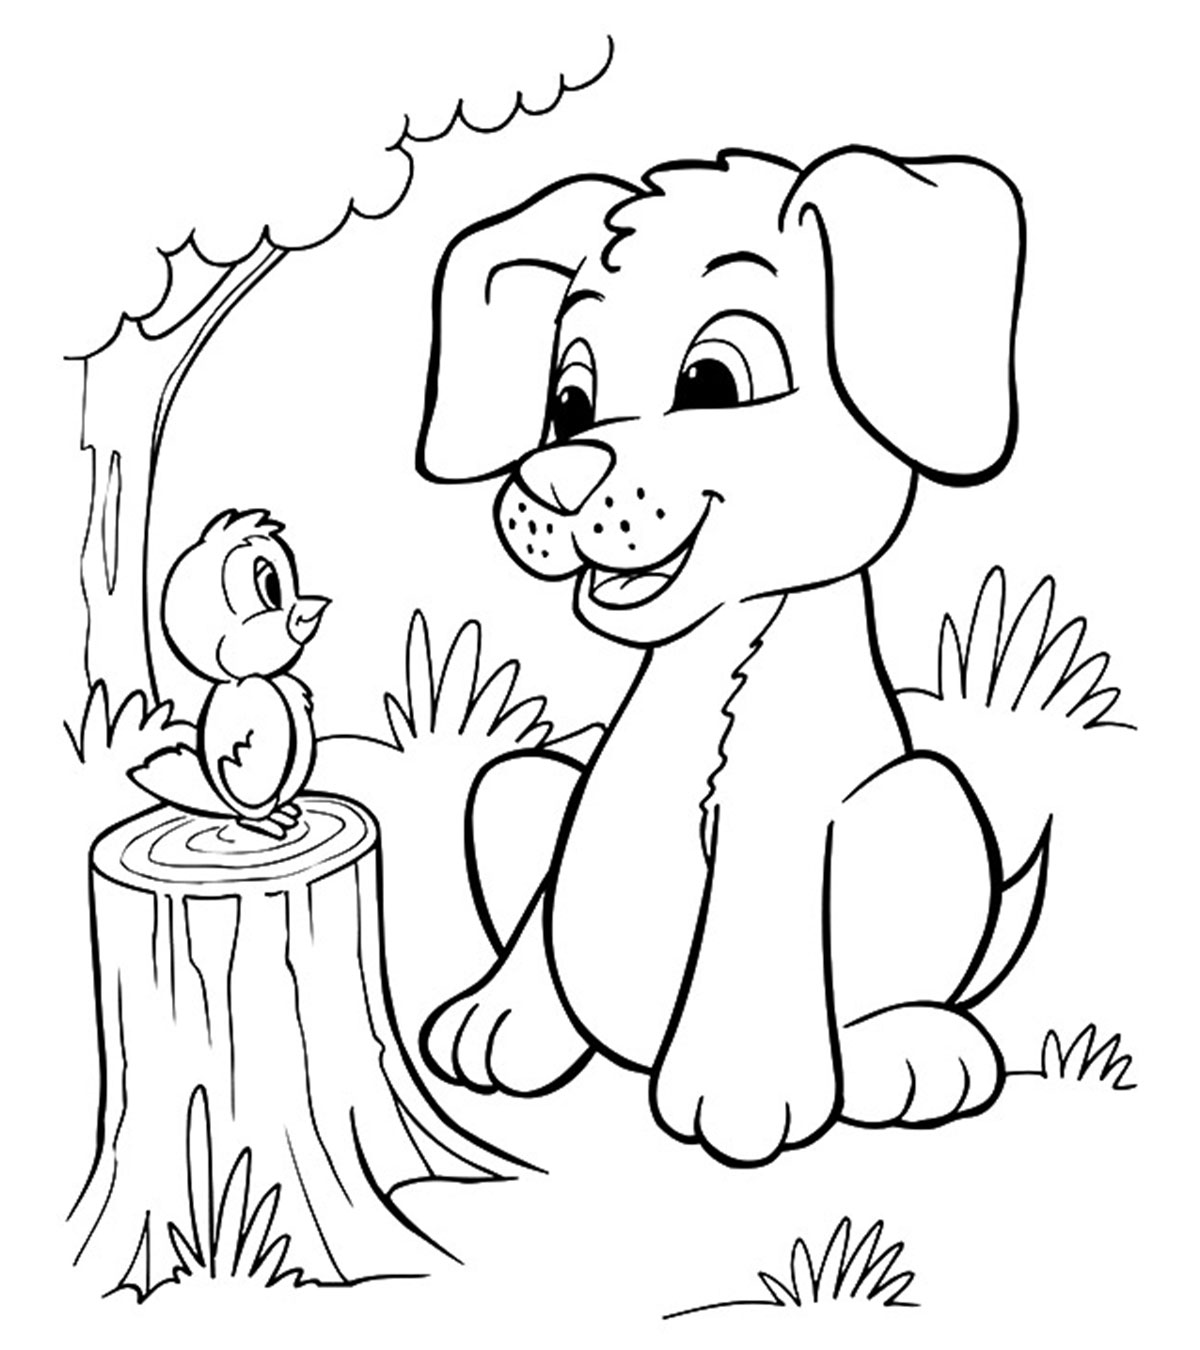 Download Top 30 Free Printable Puppy Coloring Pages Online